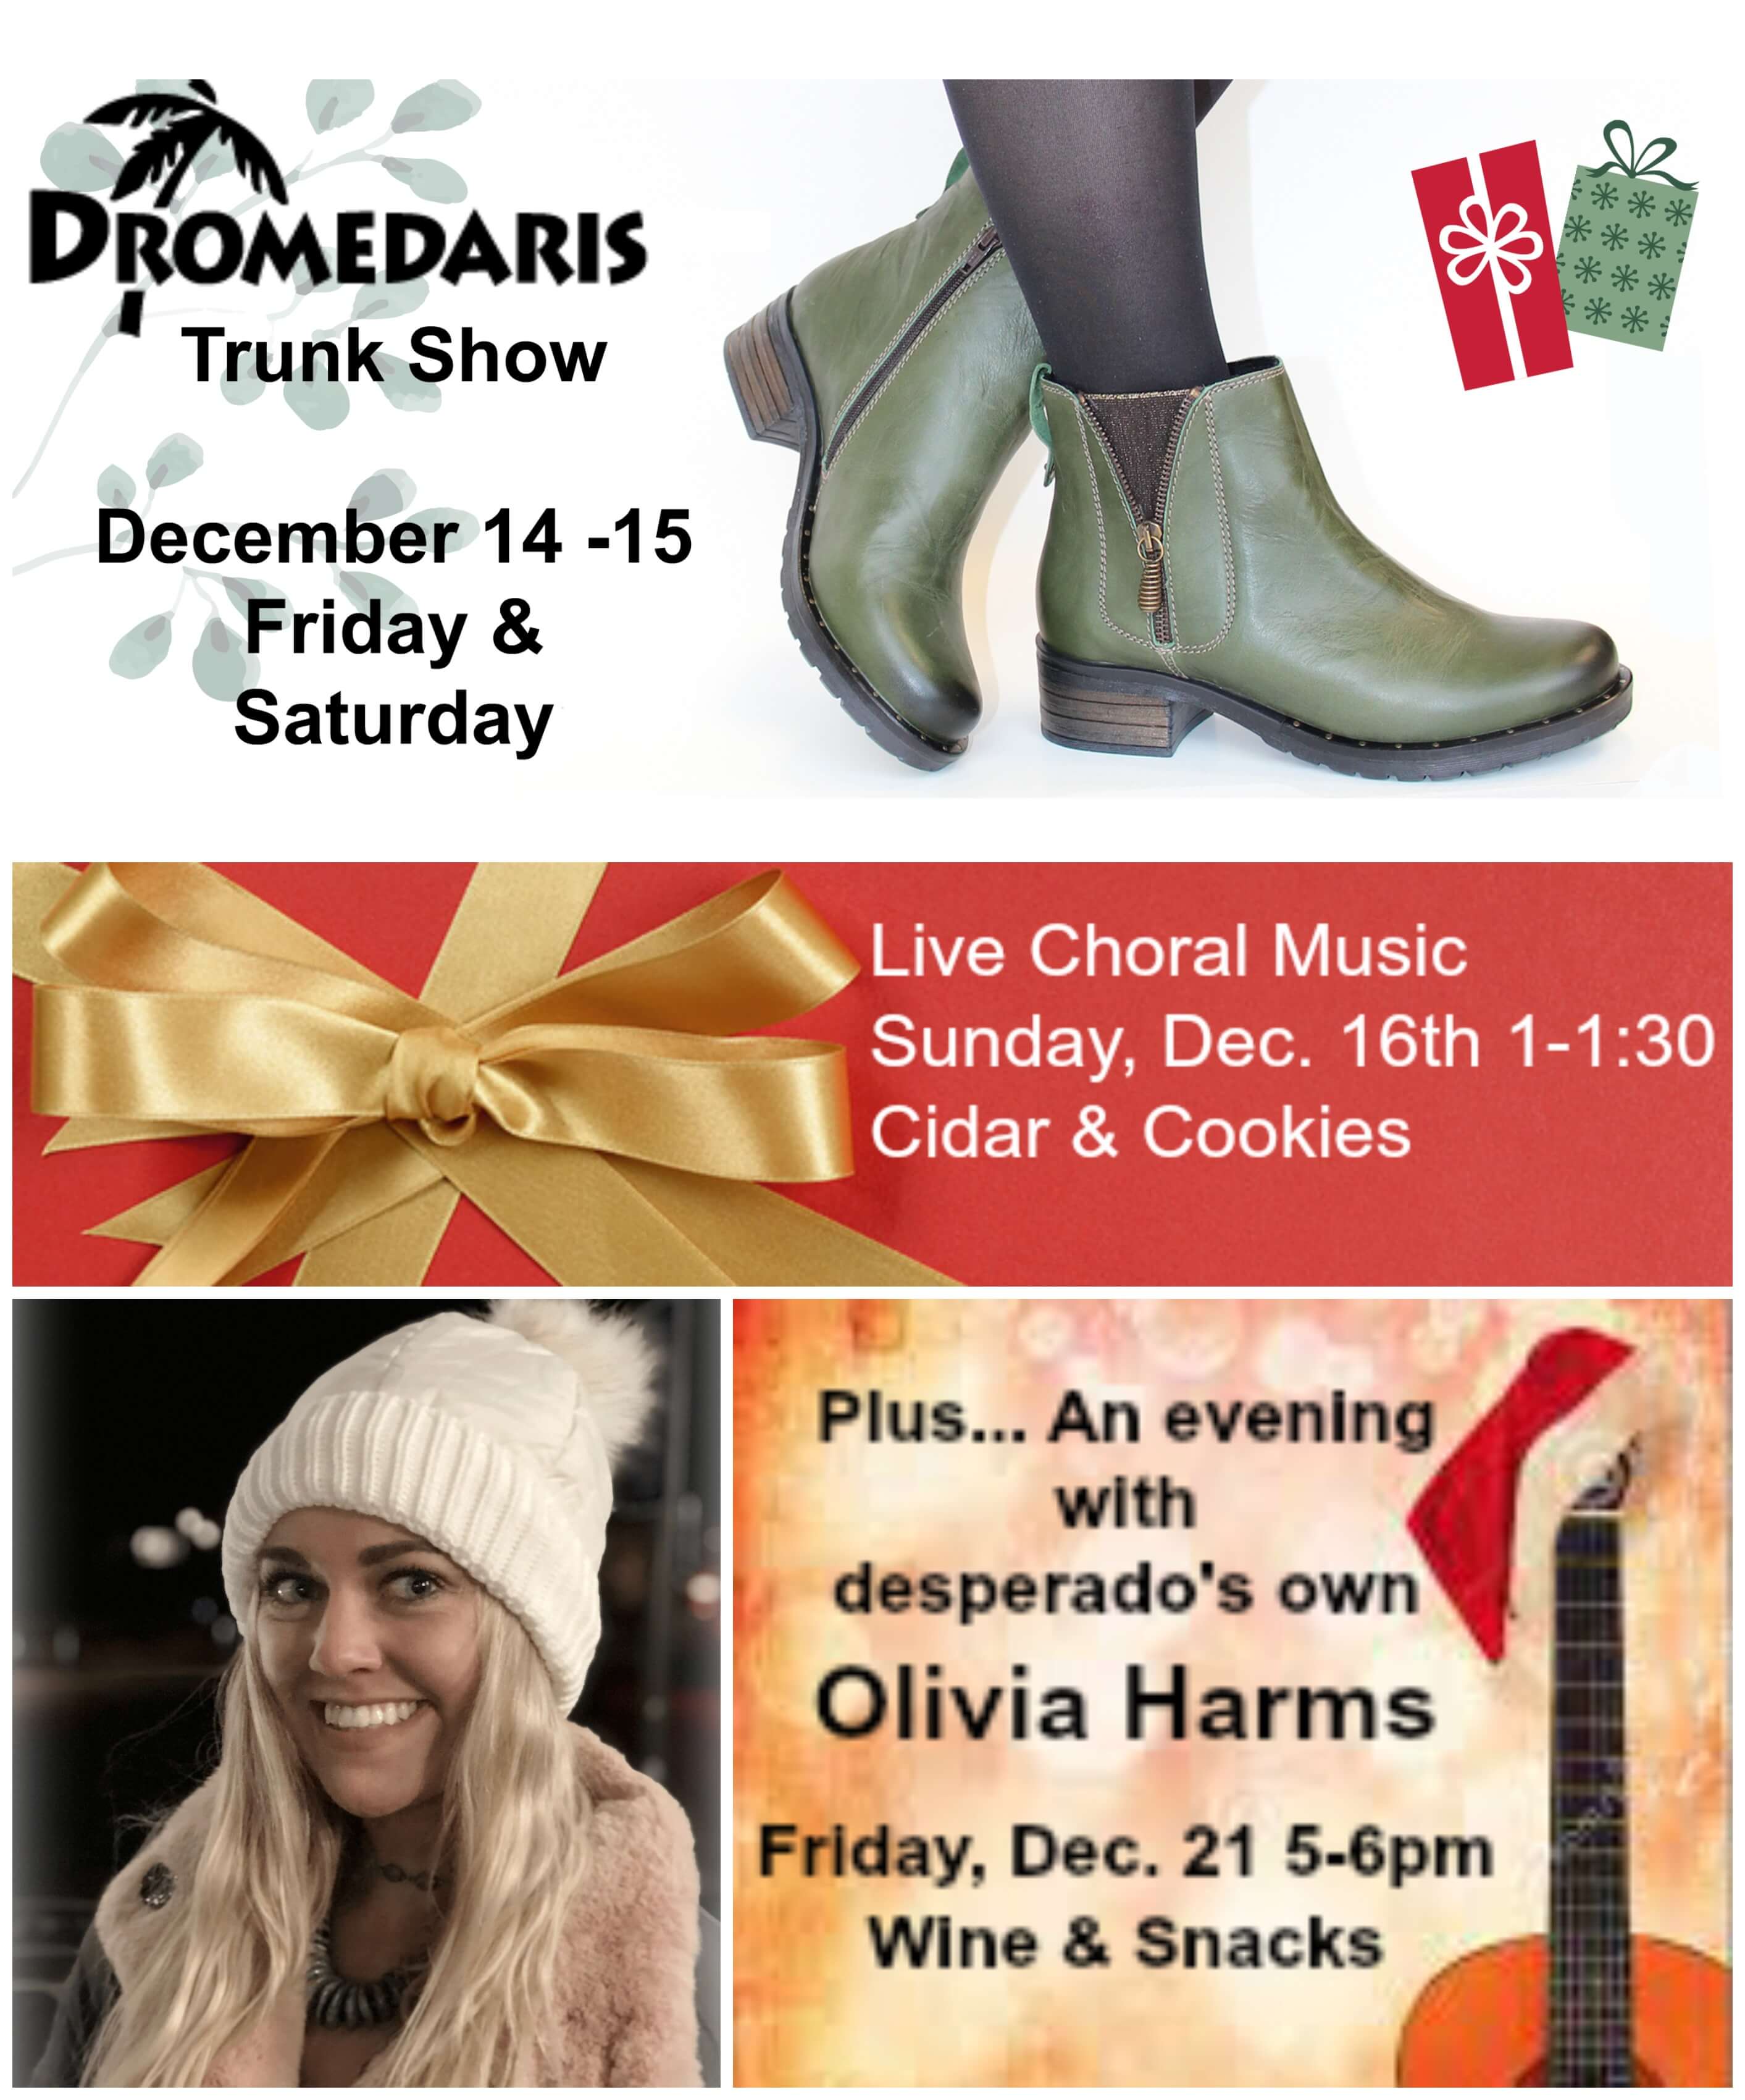 Graphic of desperado's December events calendar including Trunk Show with Dromedaris 12/14-14, Live choral music 12/16, and an evening with Olivia Harms on Friday Dec 21 from 5-6pm.